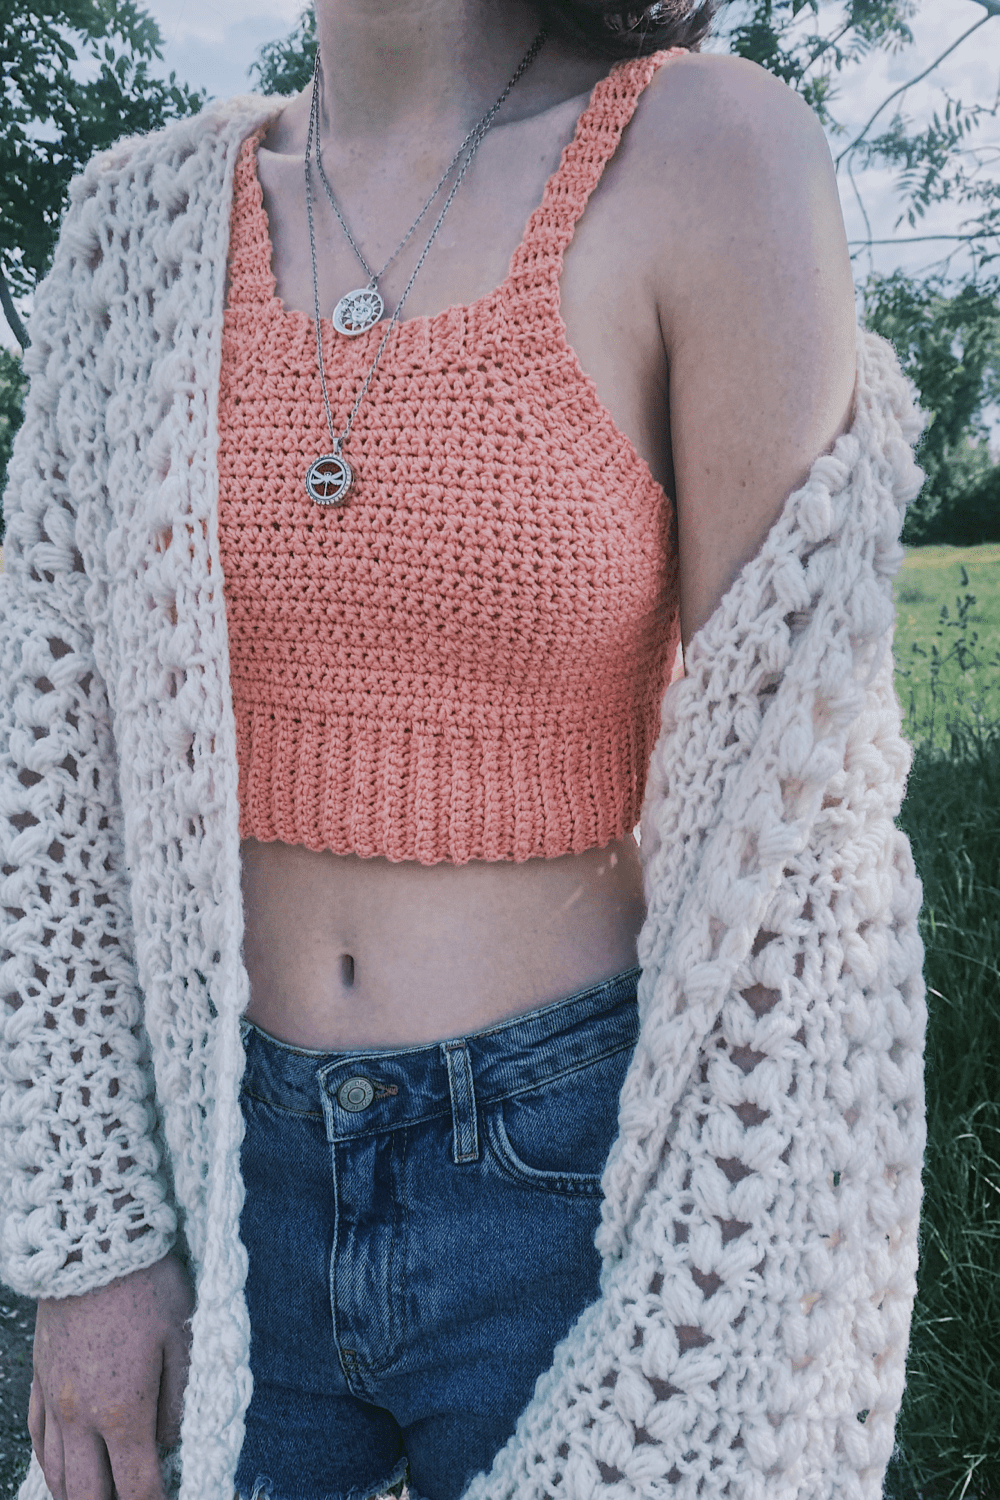 Crochet Crop Top Free Pattern (Forever 21 Style)